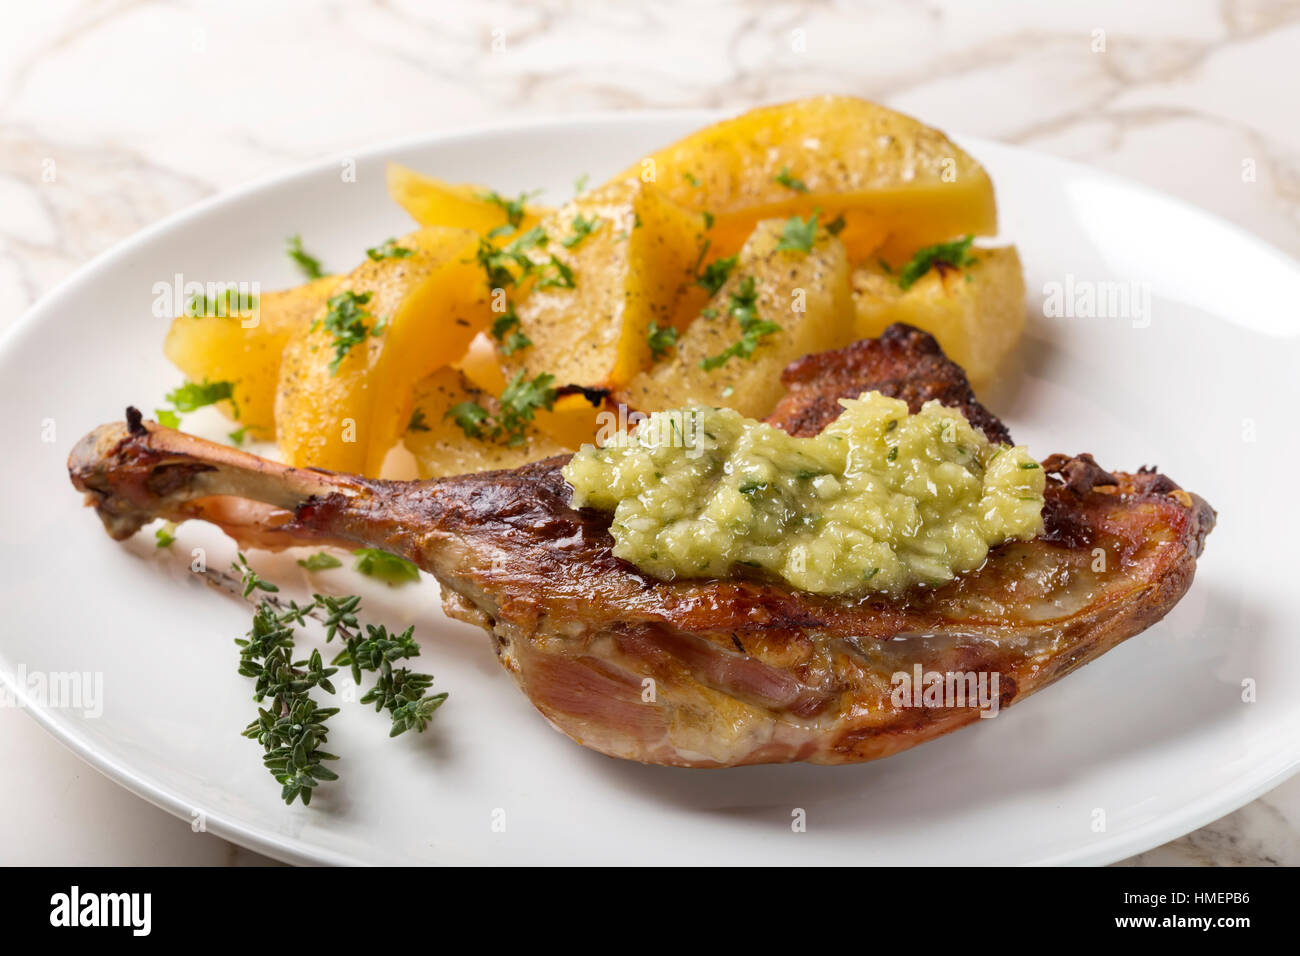 Roast duck with golden potatoes and garlic sauce with herbs on plate Stock Photo